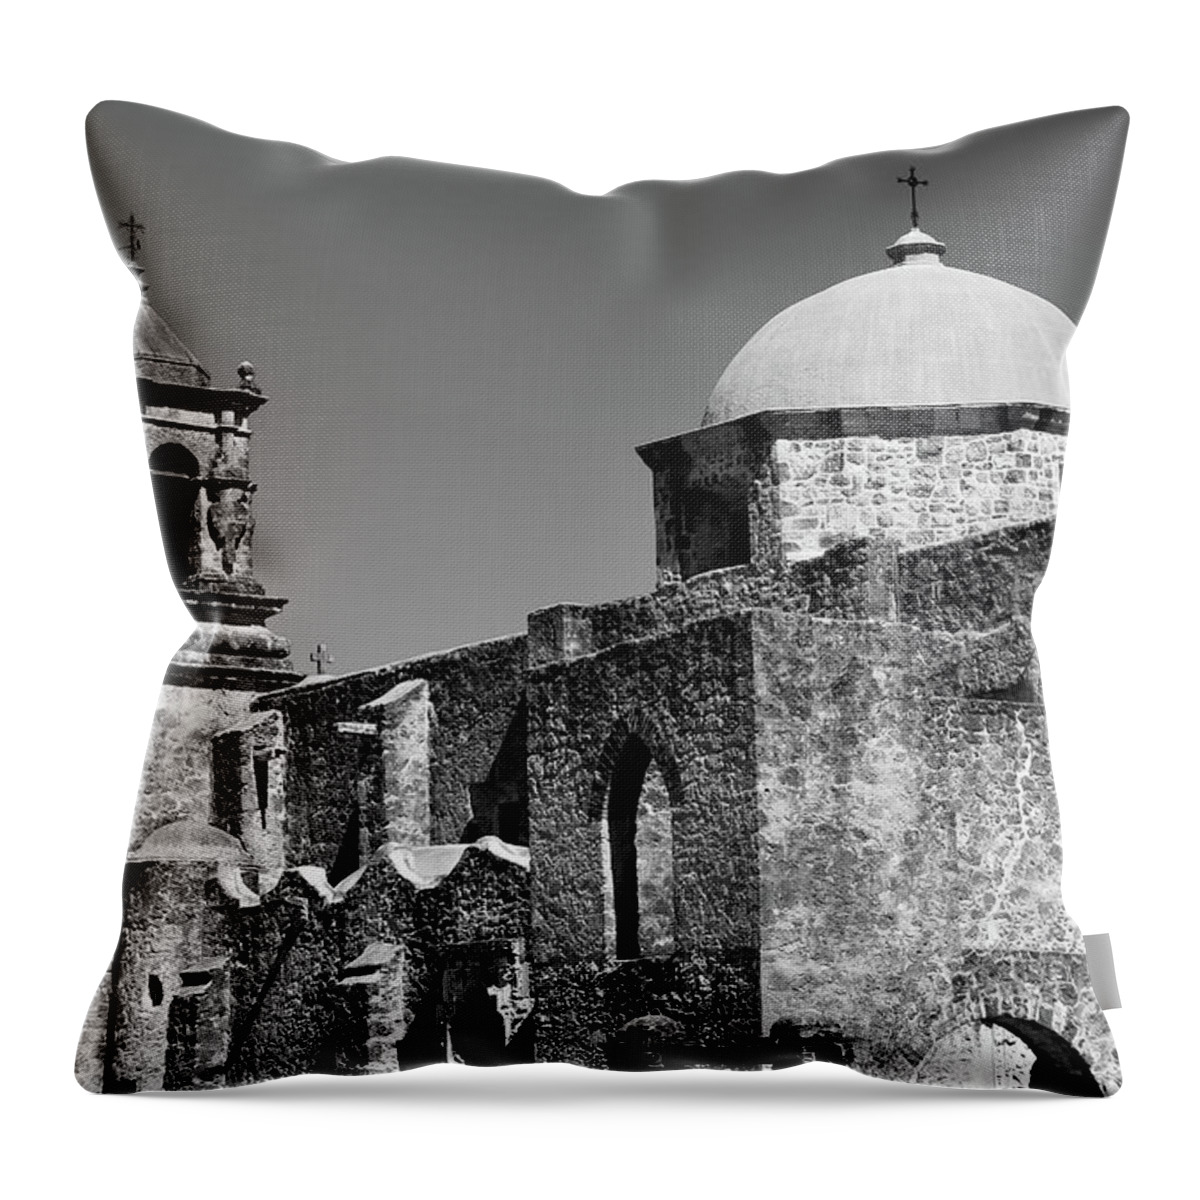 Mission San José Throw Pillow featuring the photograph Mission San Jose in Monochrome - San Antonio Texas by Gregory Ballos